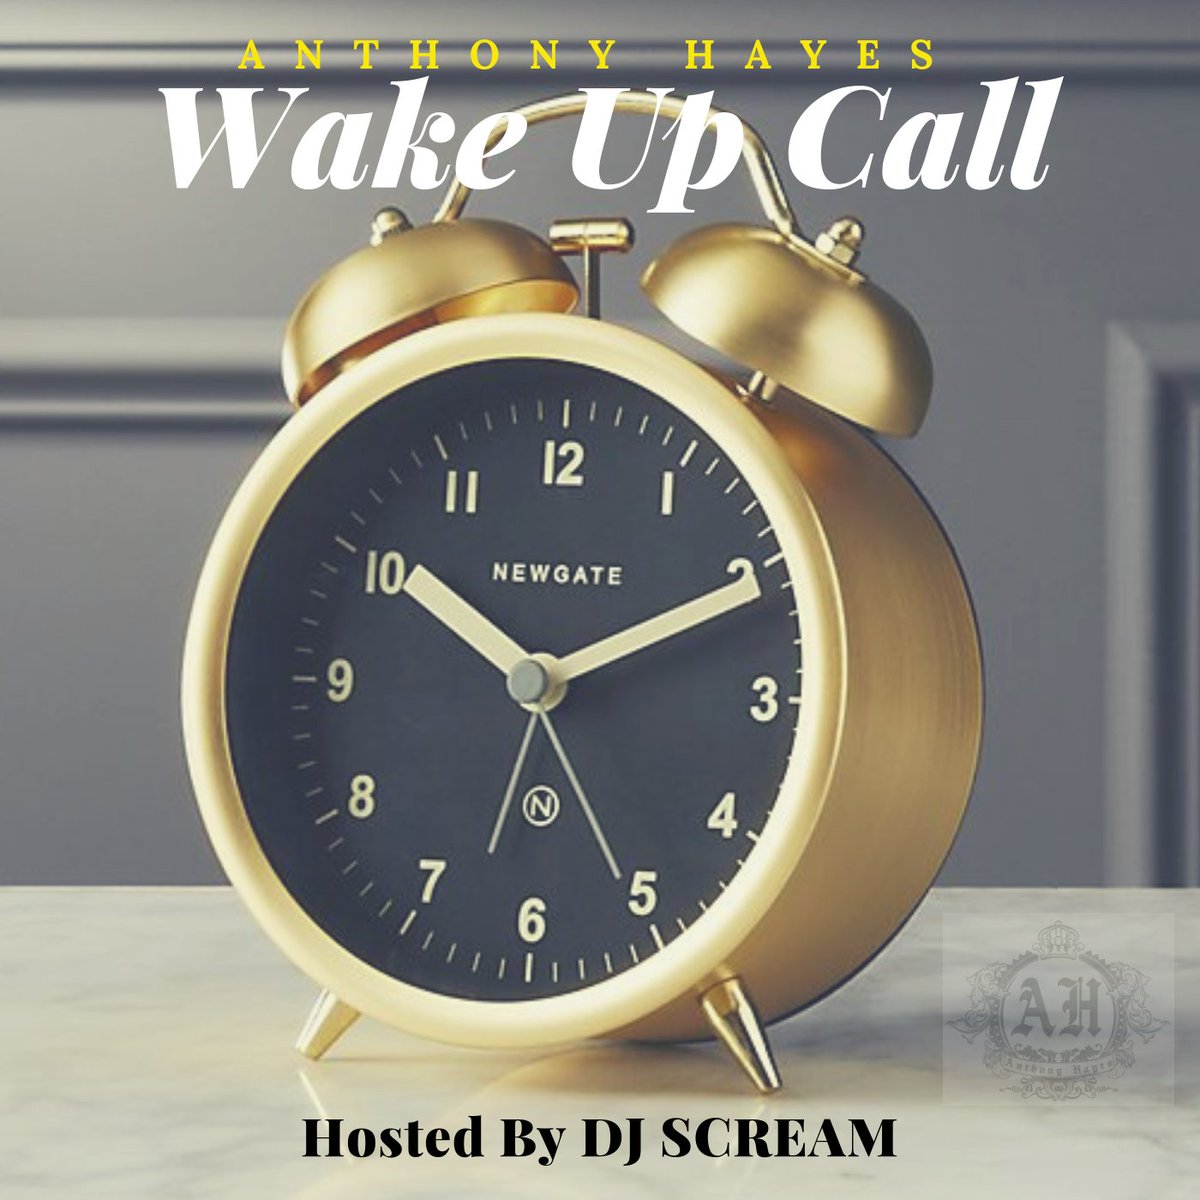 Follow RnB/Hiphop Artist #AnthonyCHayes On Instagram at instagram.com/Im_AnthonyHayes Check Out His New Mixtape 'Wake Up Call' Hosted By DJ Scream Streaming Now On Tidal * #indieartistblueprint